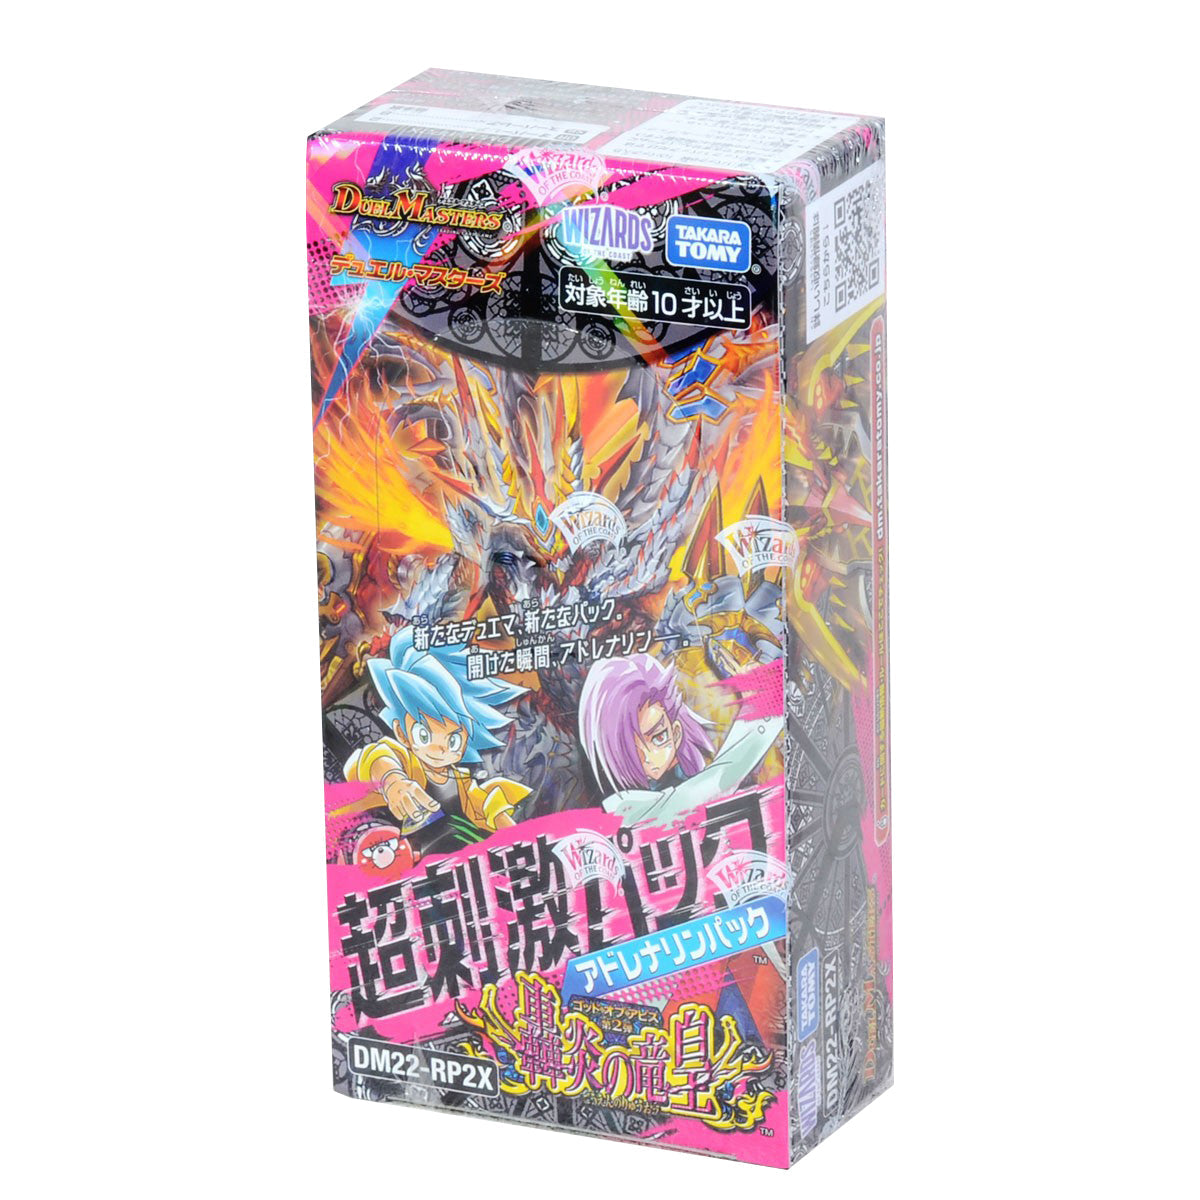 Duel Masters TCG &quot;Dragon Emperor of Roaring Flame&quot; (Adrenaline Pack) [DM22-RP2X] (Japanese)